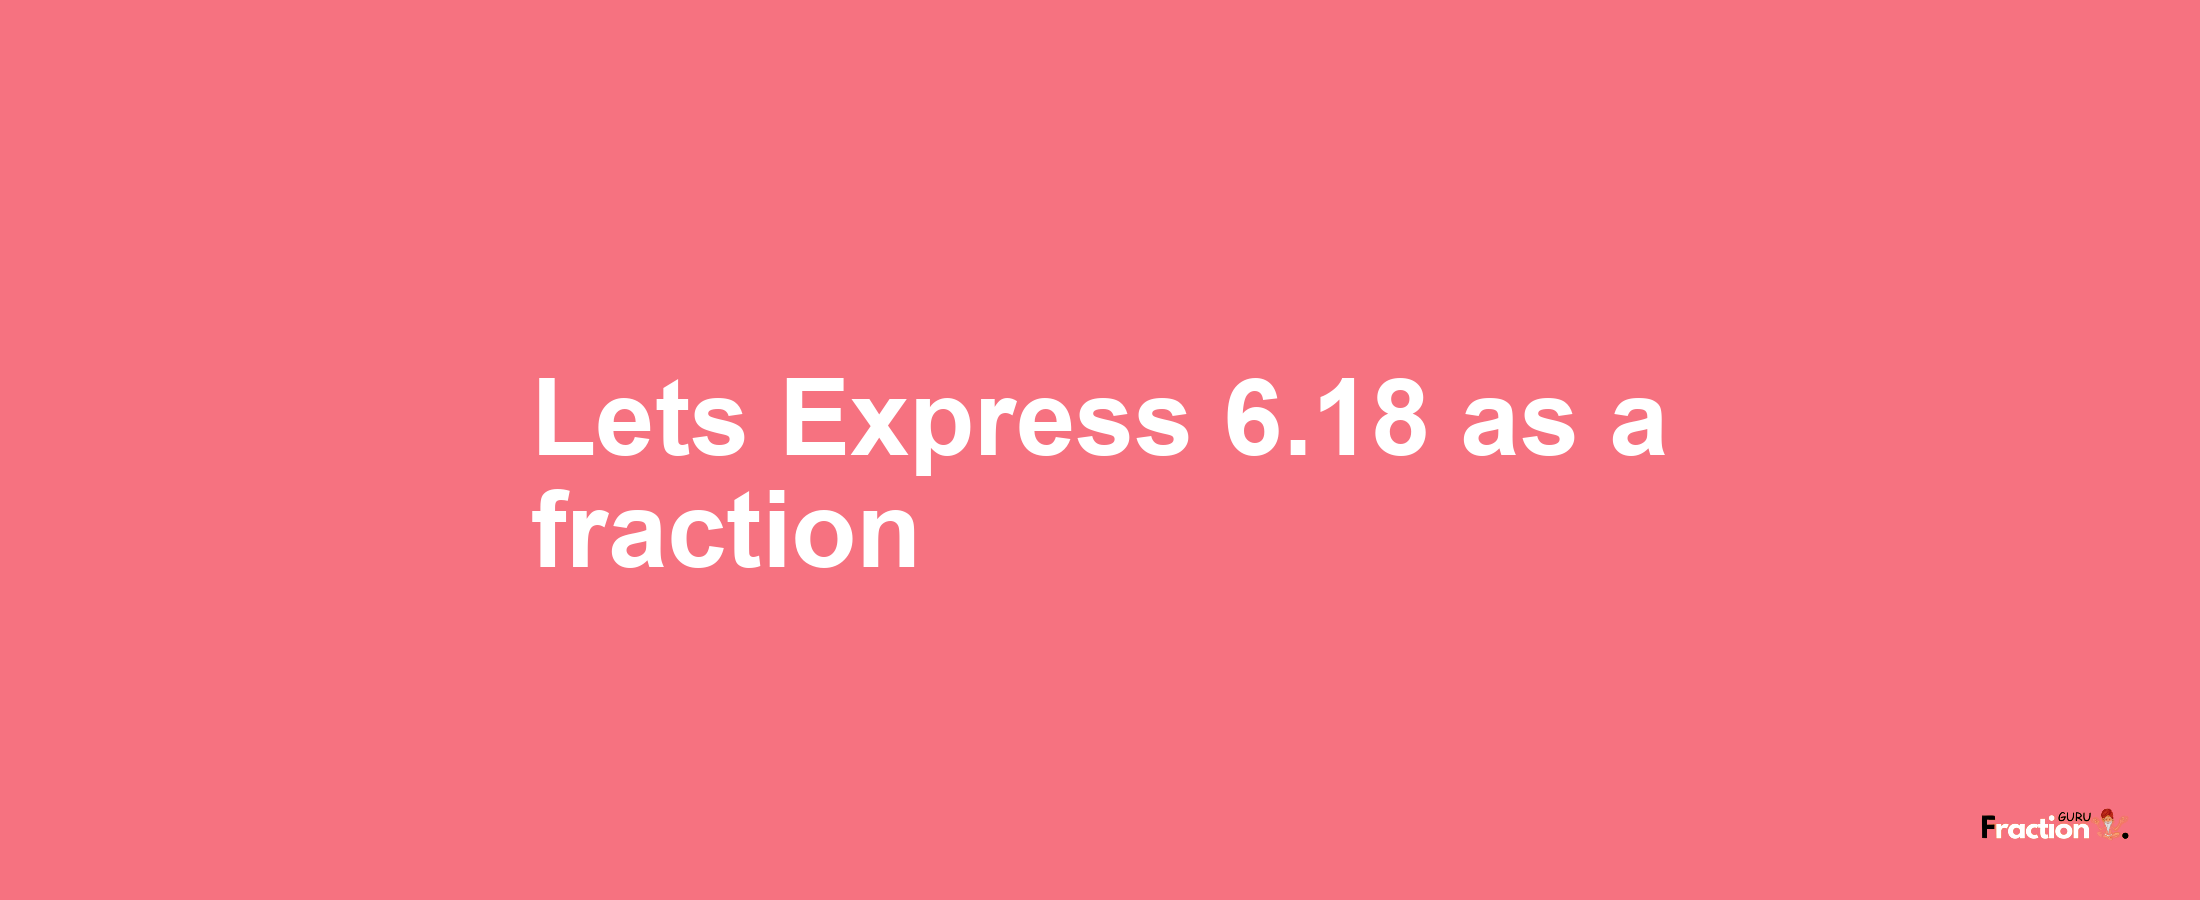 Lets Express 6.18 as afraction